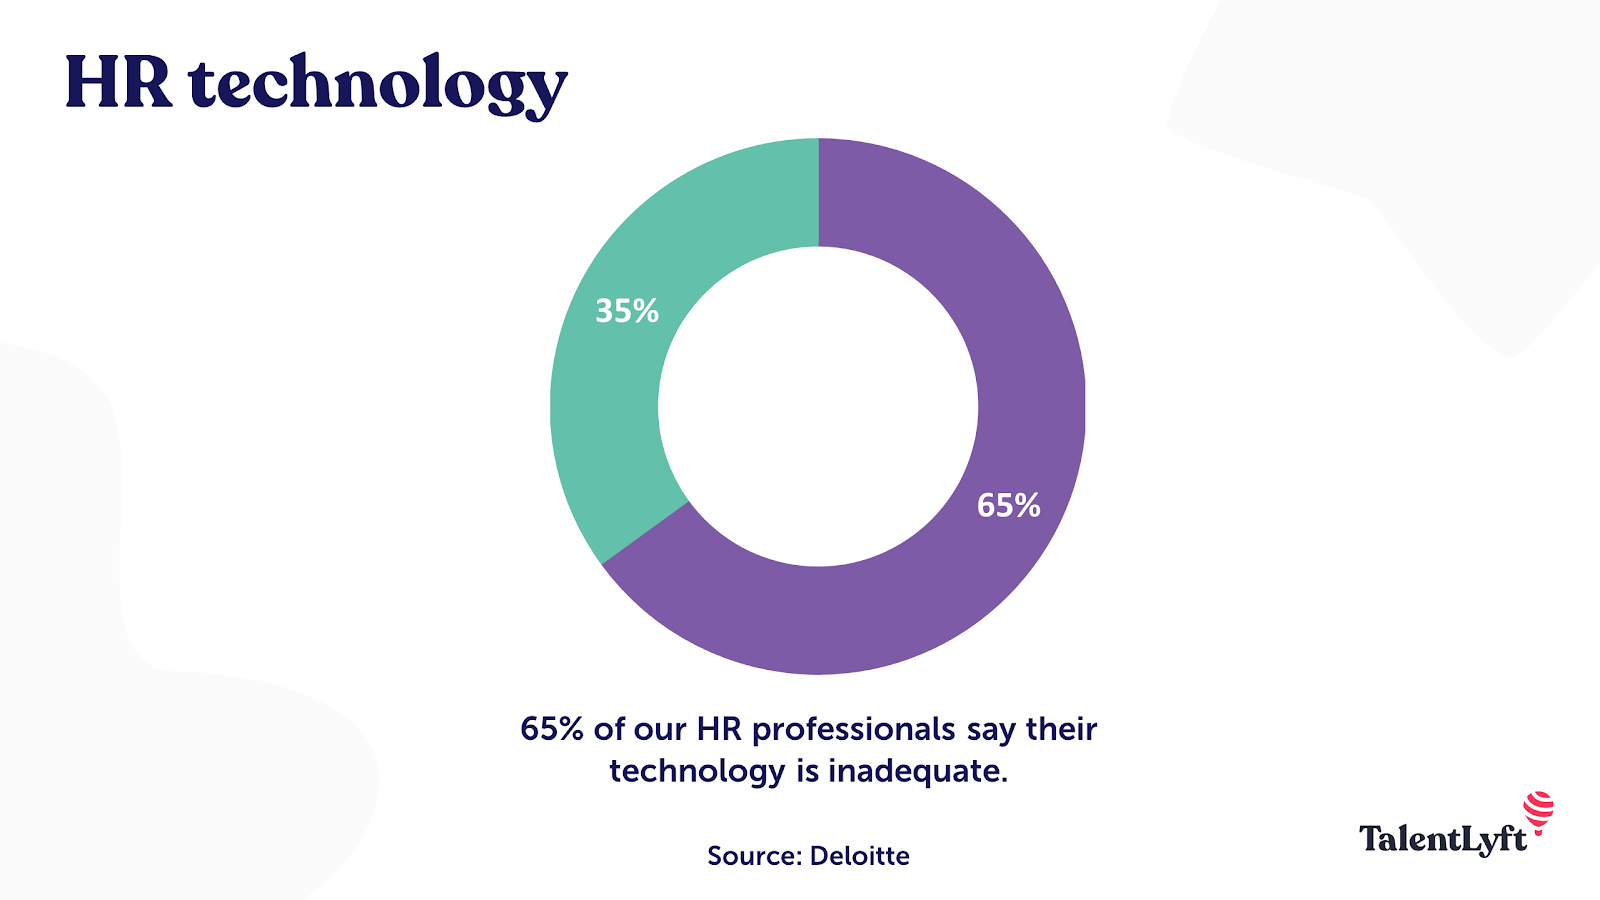 HR technology relevance statistic